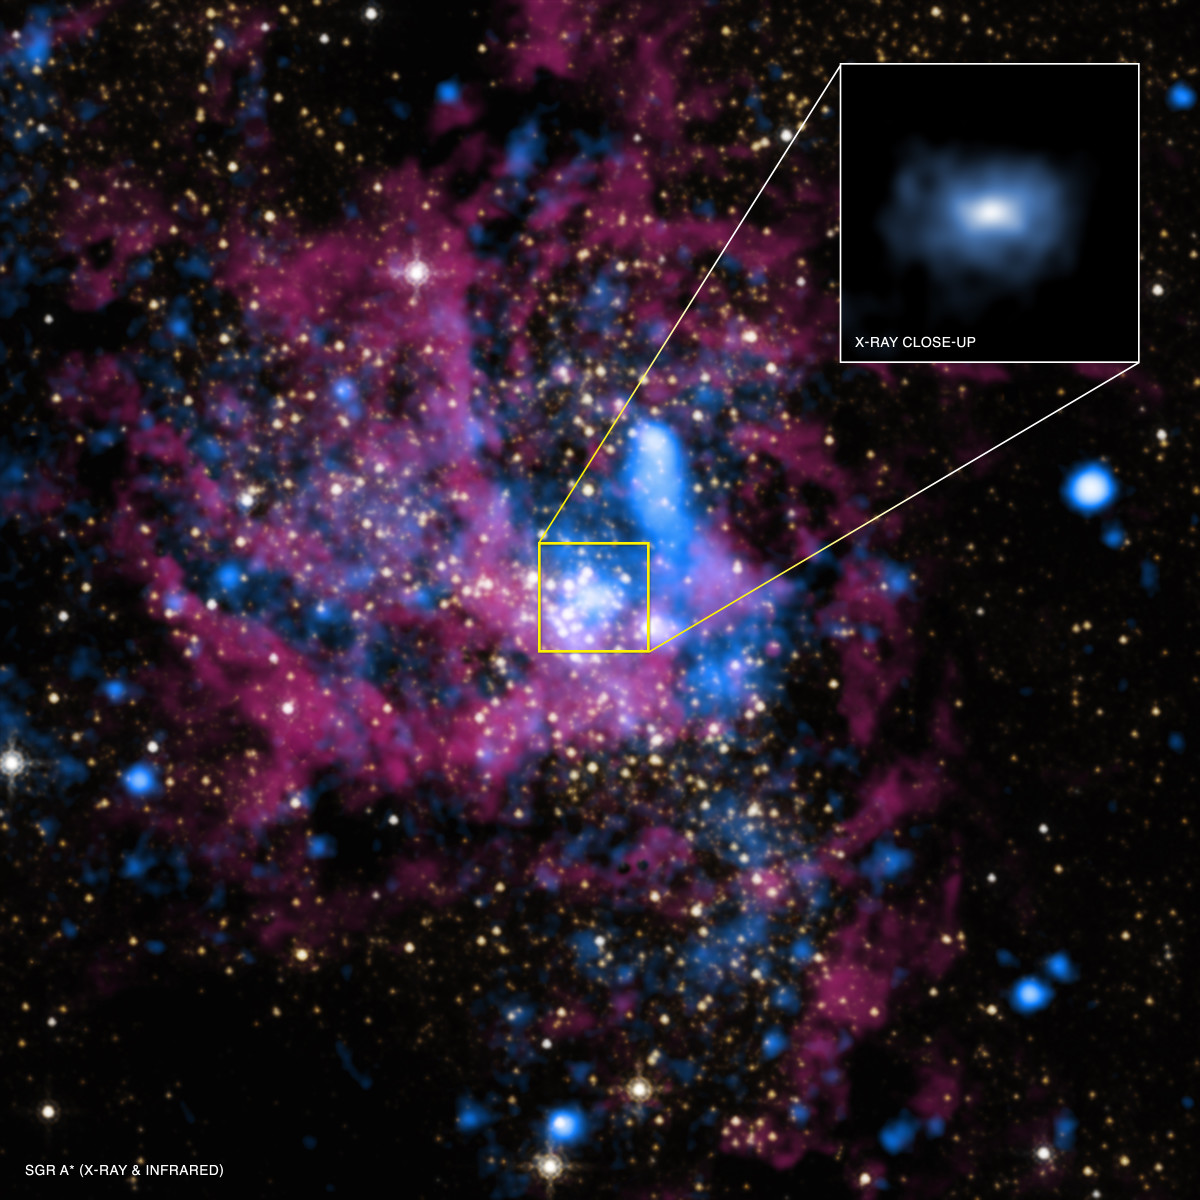 What Do We Learn About Supermassive Black Hole Sagittarius A* From X-Ray Emissions?